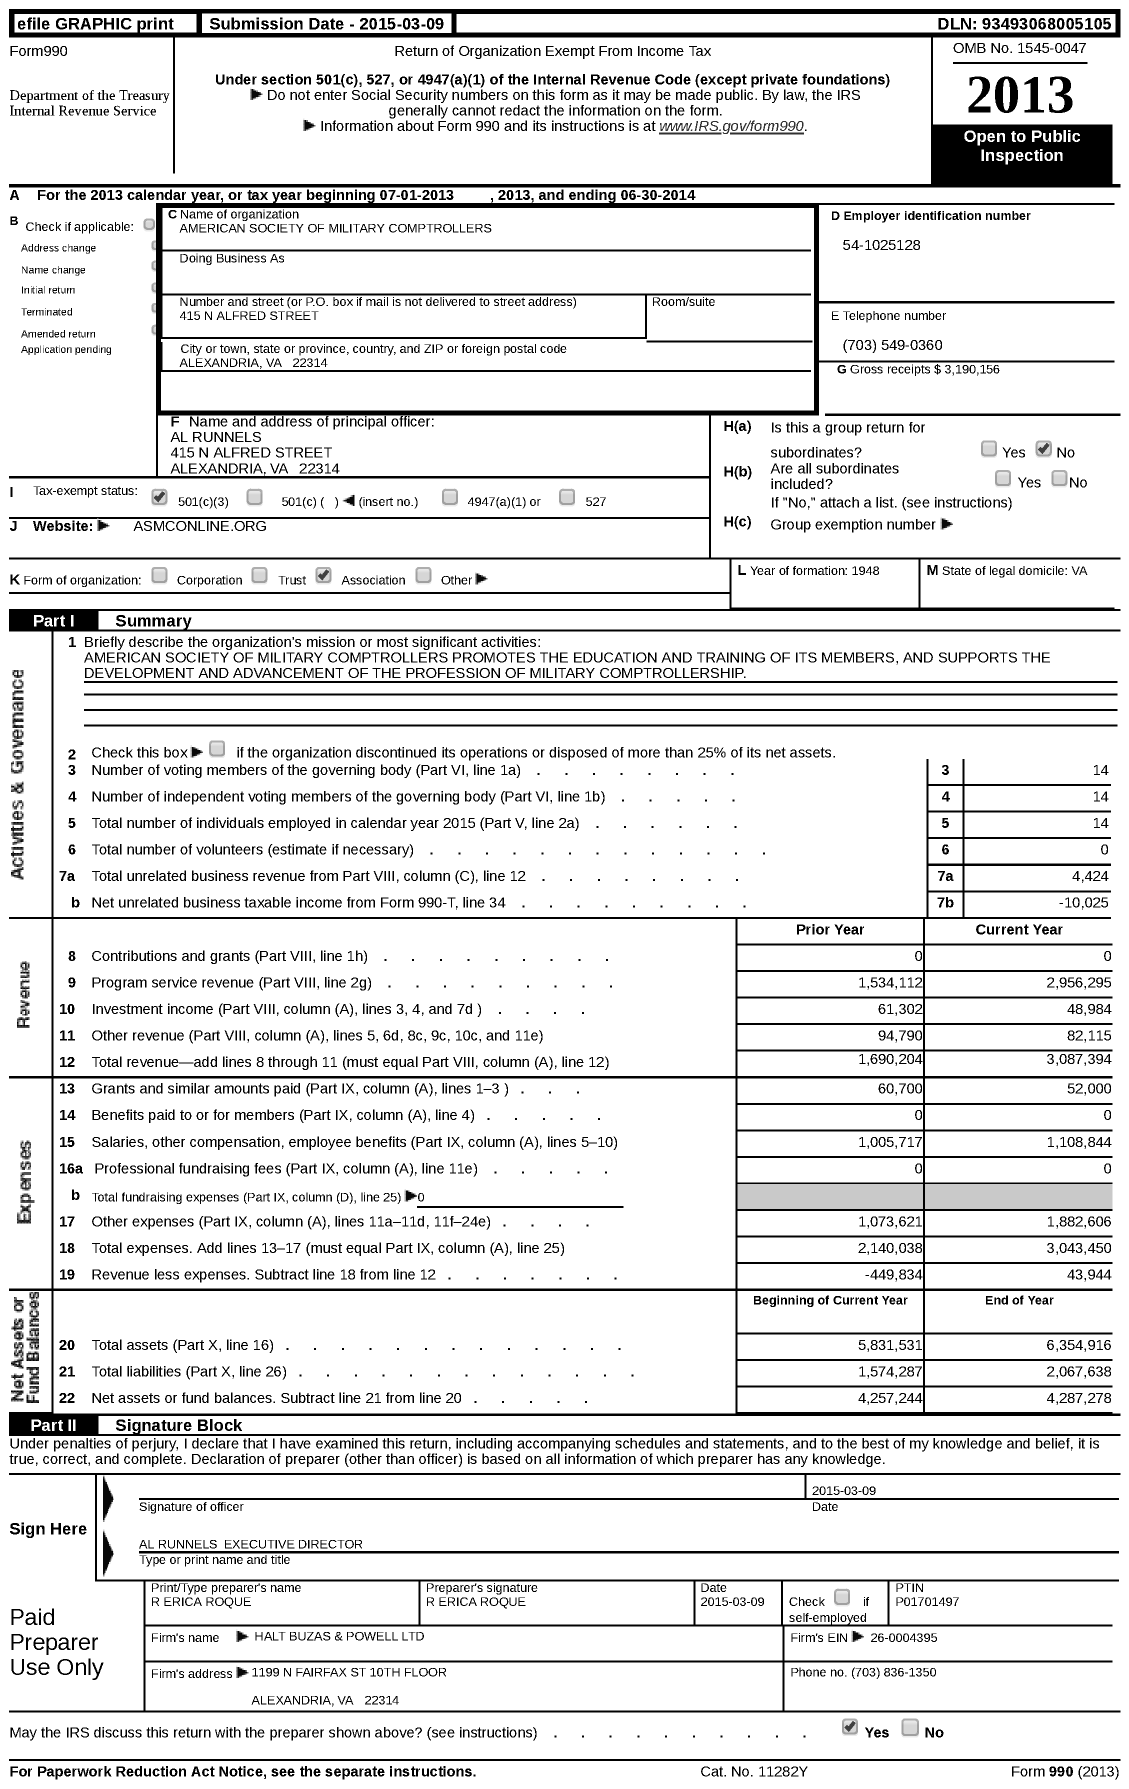 Image of first page of 2013 Form 990 for American Society of Military Comptrollers